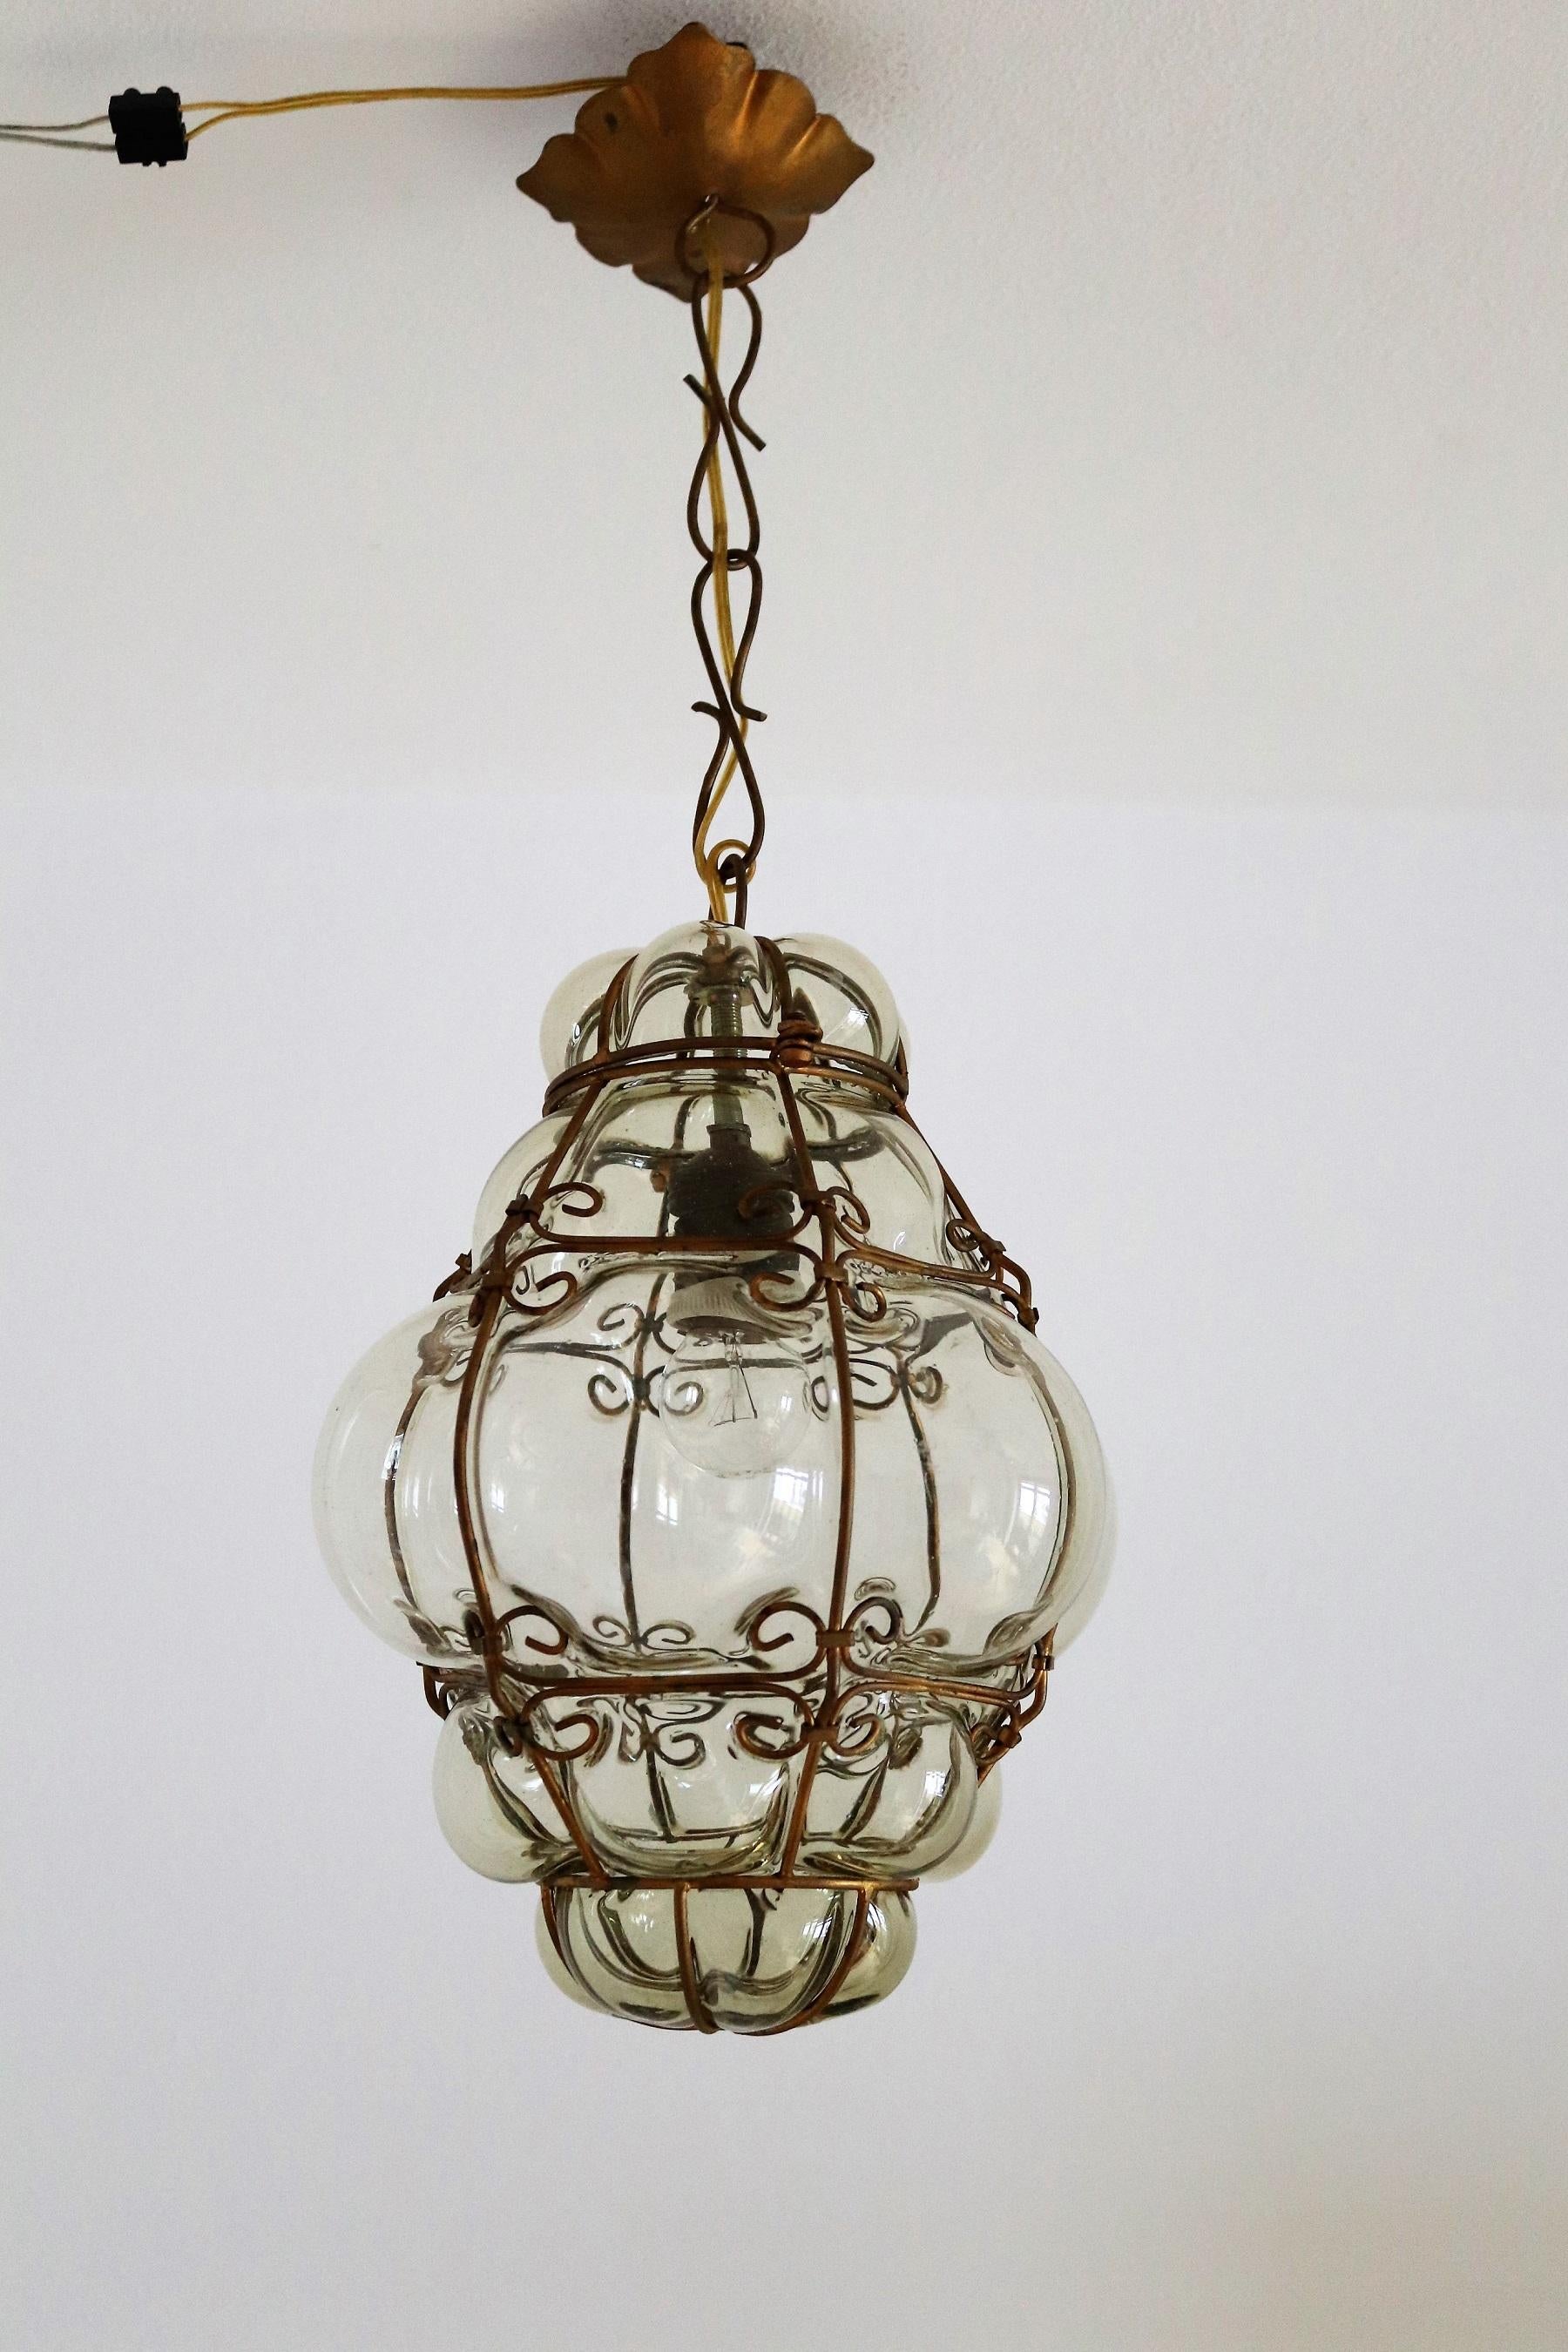 Gorgeous hand blown pendant light or lantern, Made in the 1950s in Italy, Murano.
The glass is blown inside the metal cage by skilled artisan.
Leaves beautiful shadows on wall and ceiling when illuminated !
The glass is in mint condition.
The